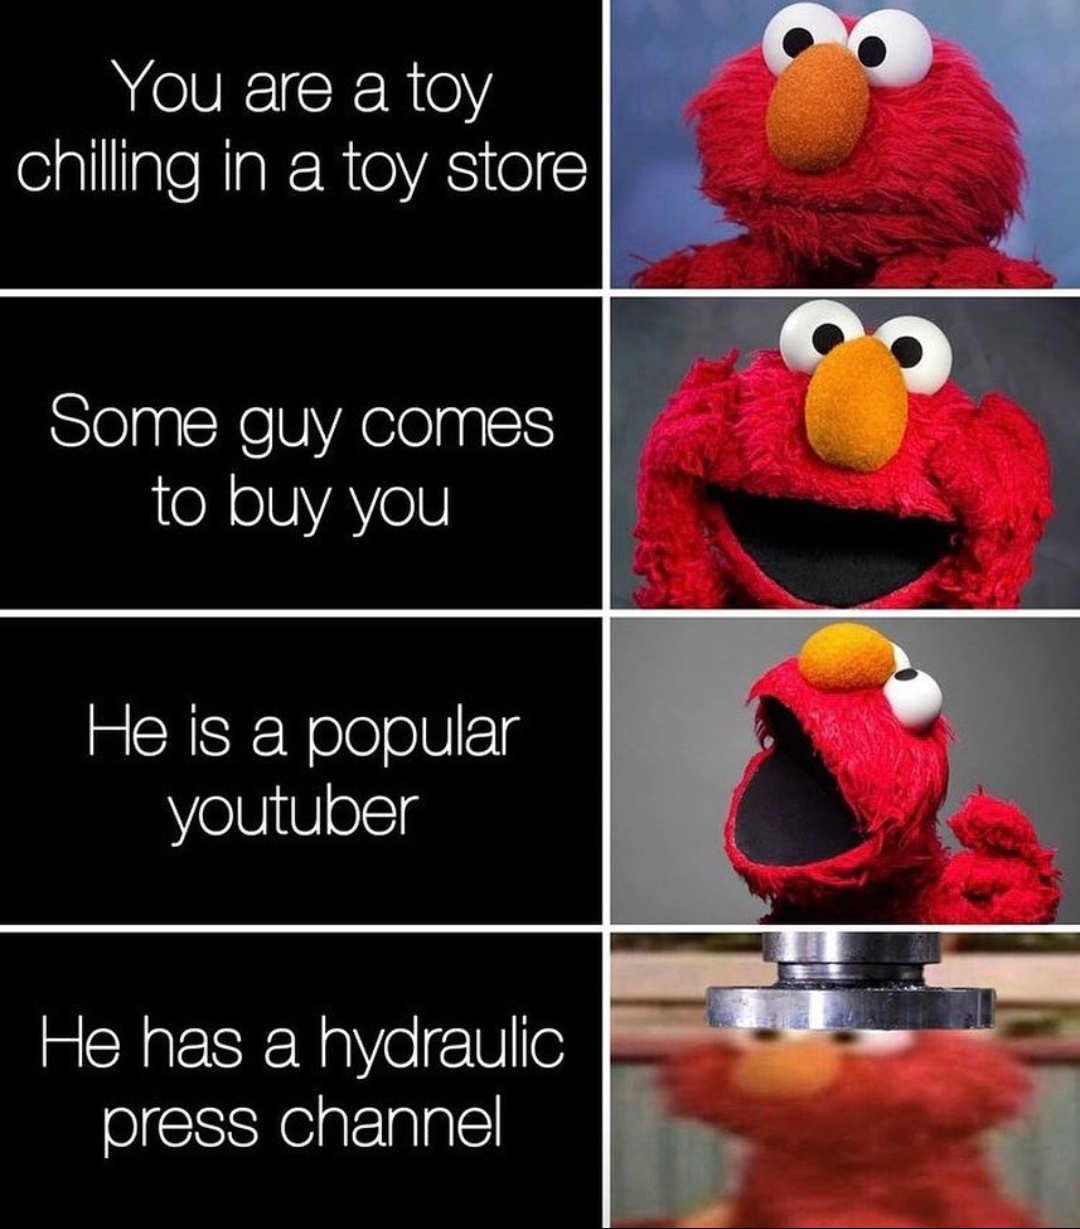 elmo hydraulic press meme - You are a toy chilling in a toy store Some guy comes to buy you He is a popular youtuber He has a hydraulic press channel